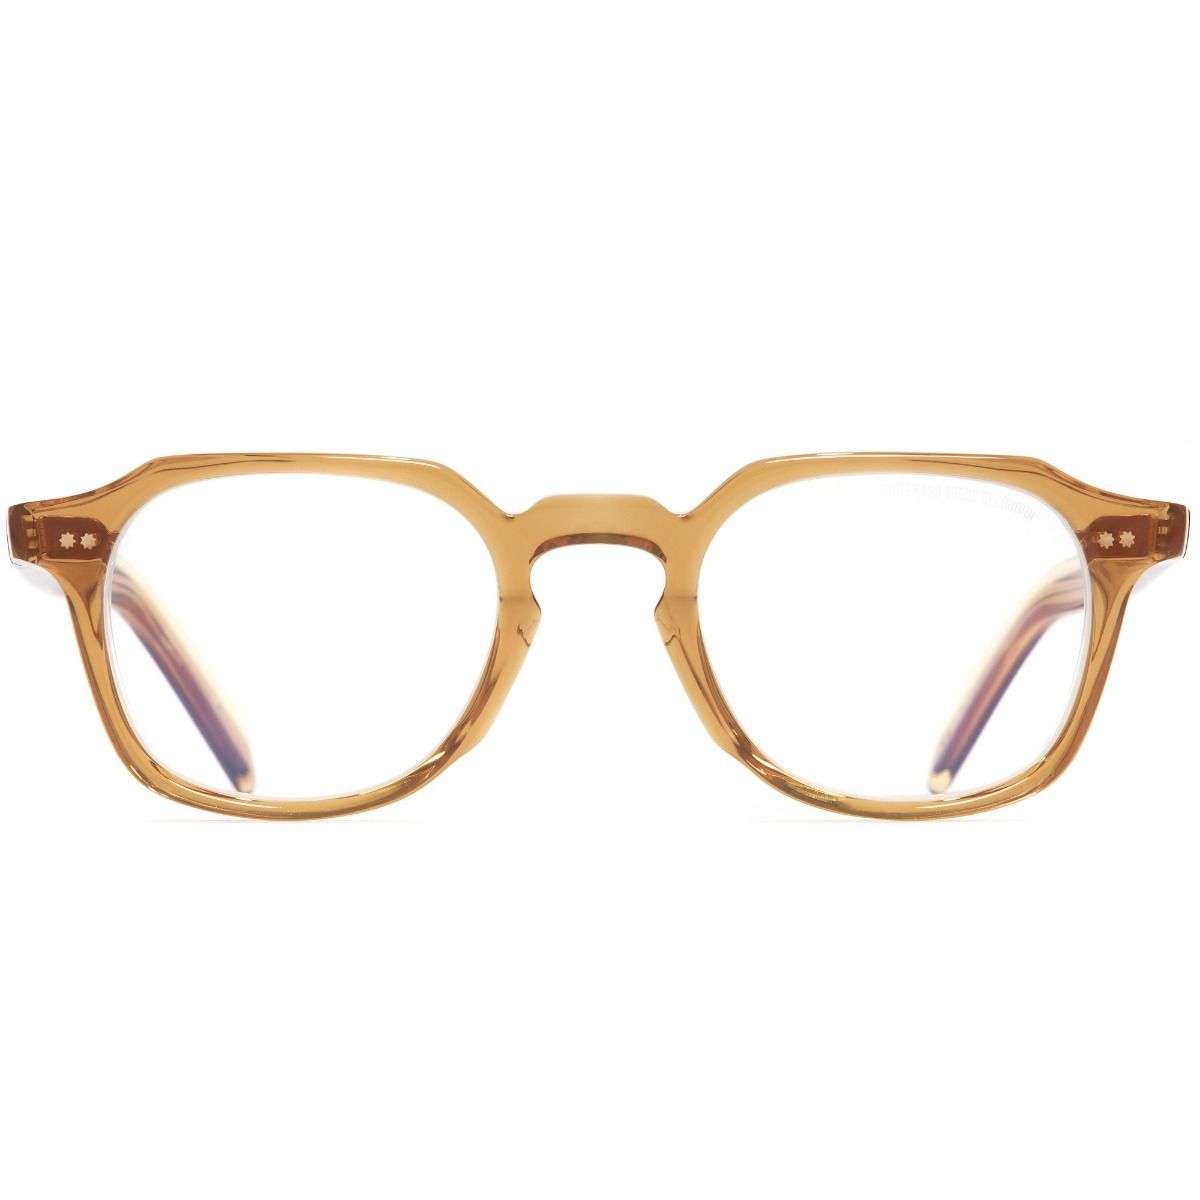 GR03 Square Optical Glasses - Multi Yellow by Cutler and Gross